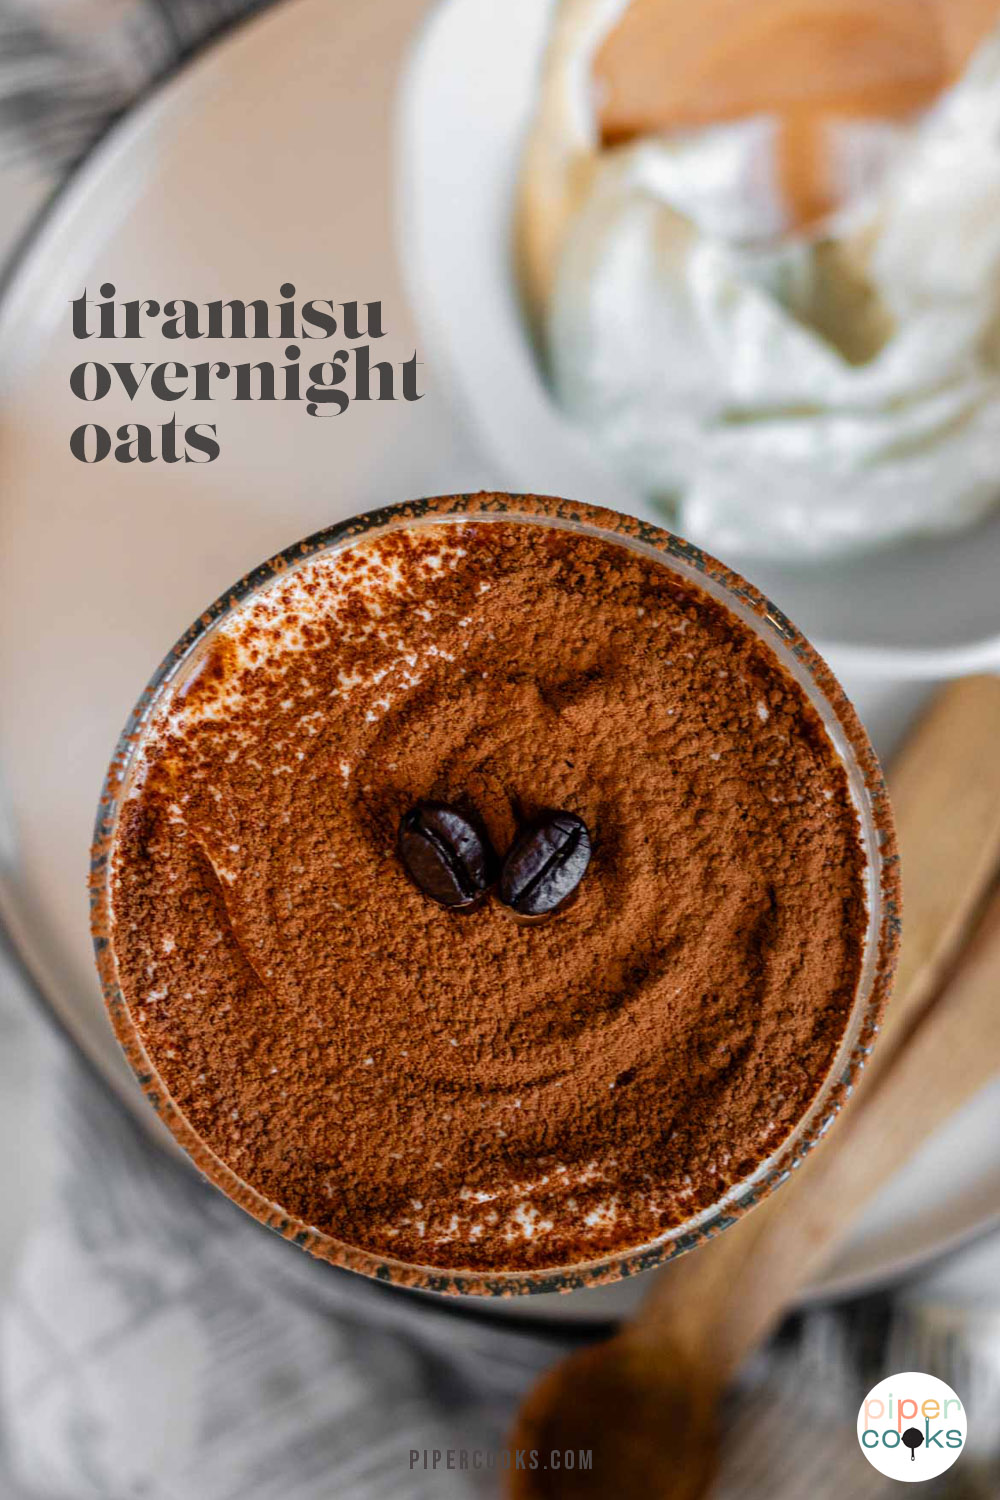 Overnight oats in a glass topped with cocoa powder and two coffee beans with text for Pinterest.